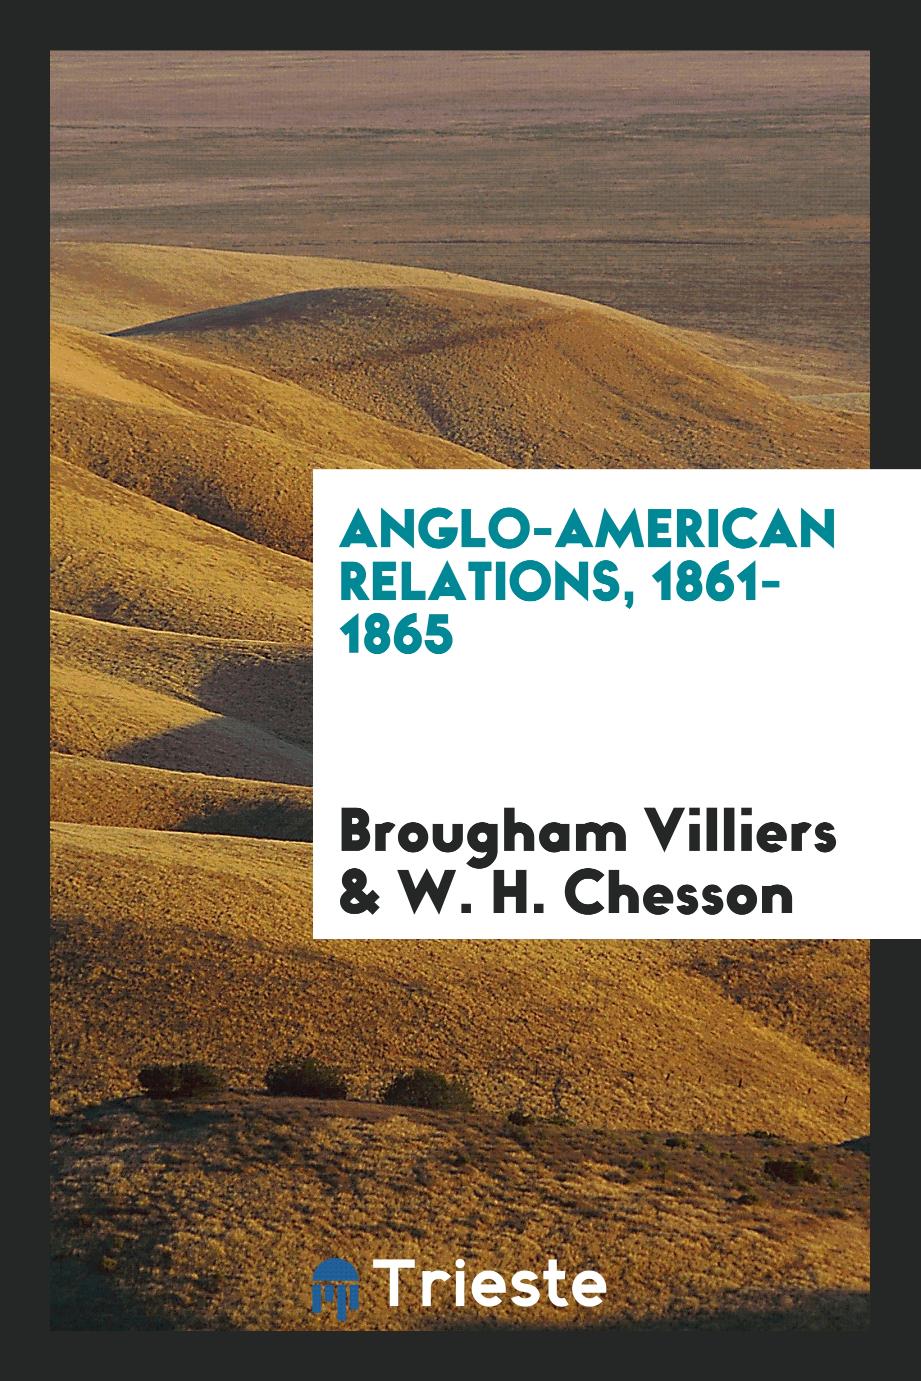 Anglo-American relations, 1861-1865